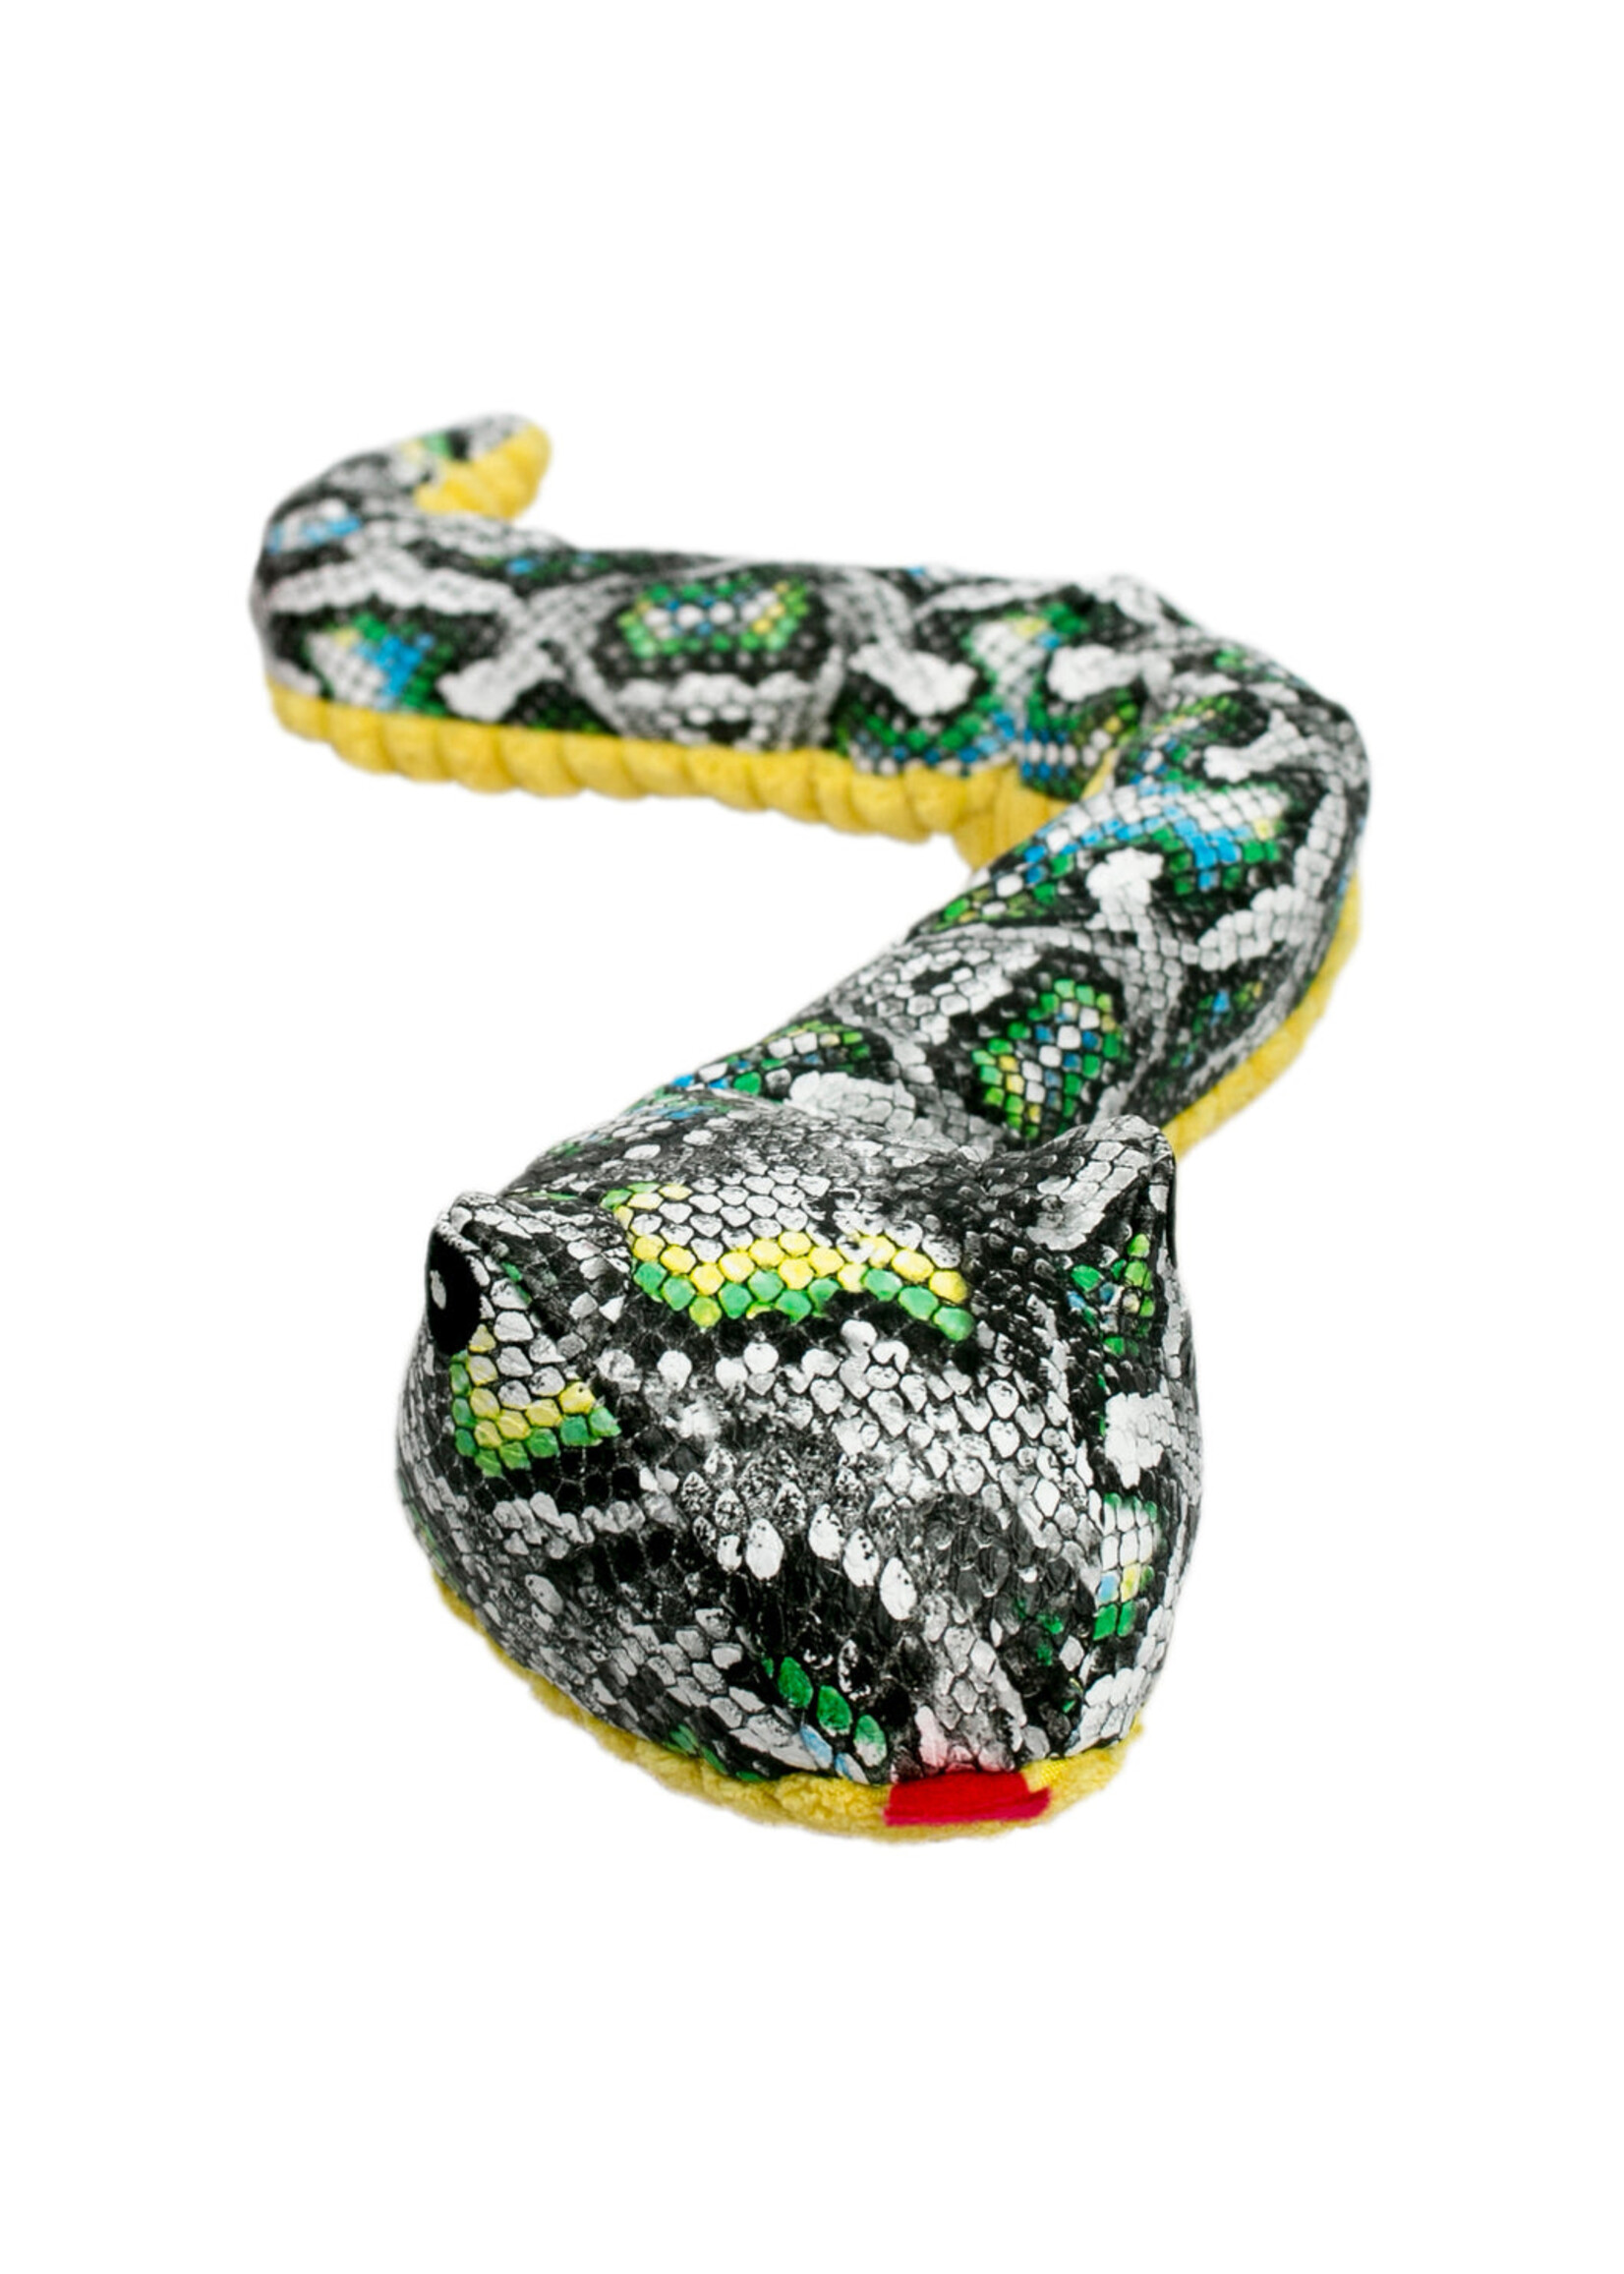 Tall Tails Tall Tails Plush Snake 23in